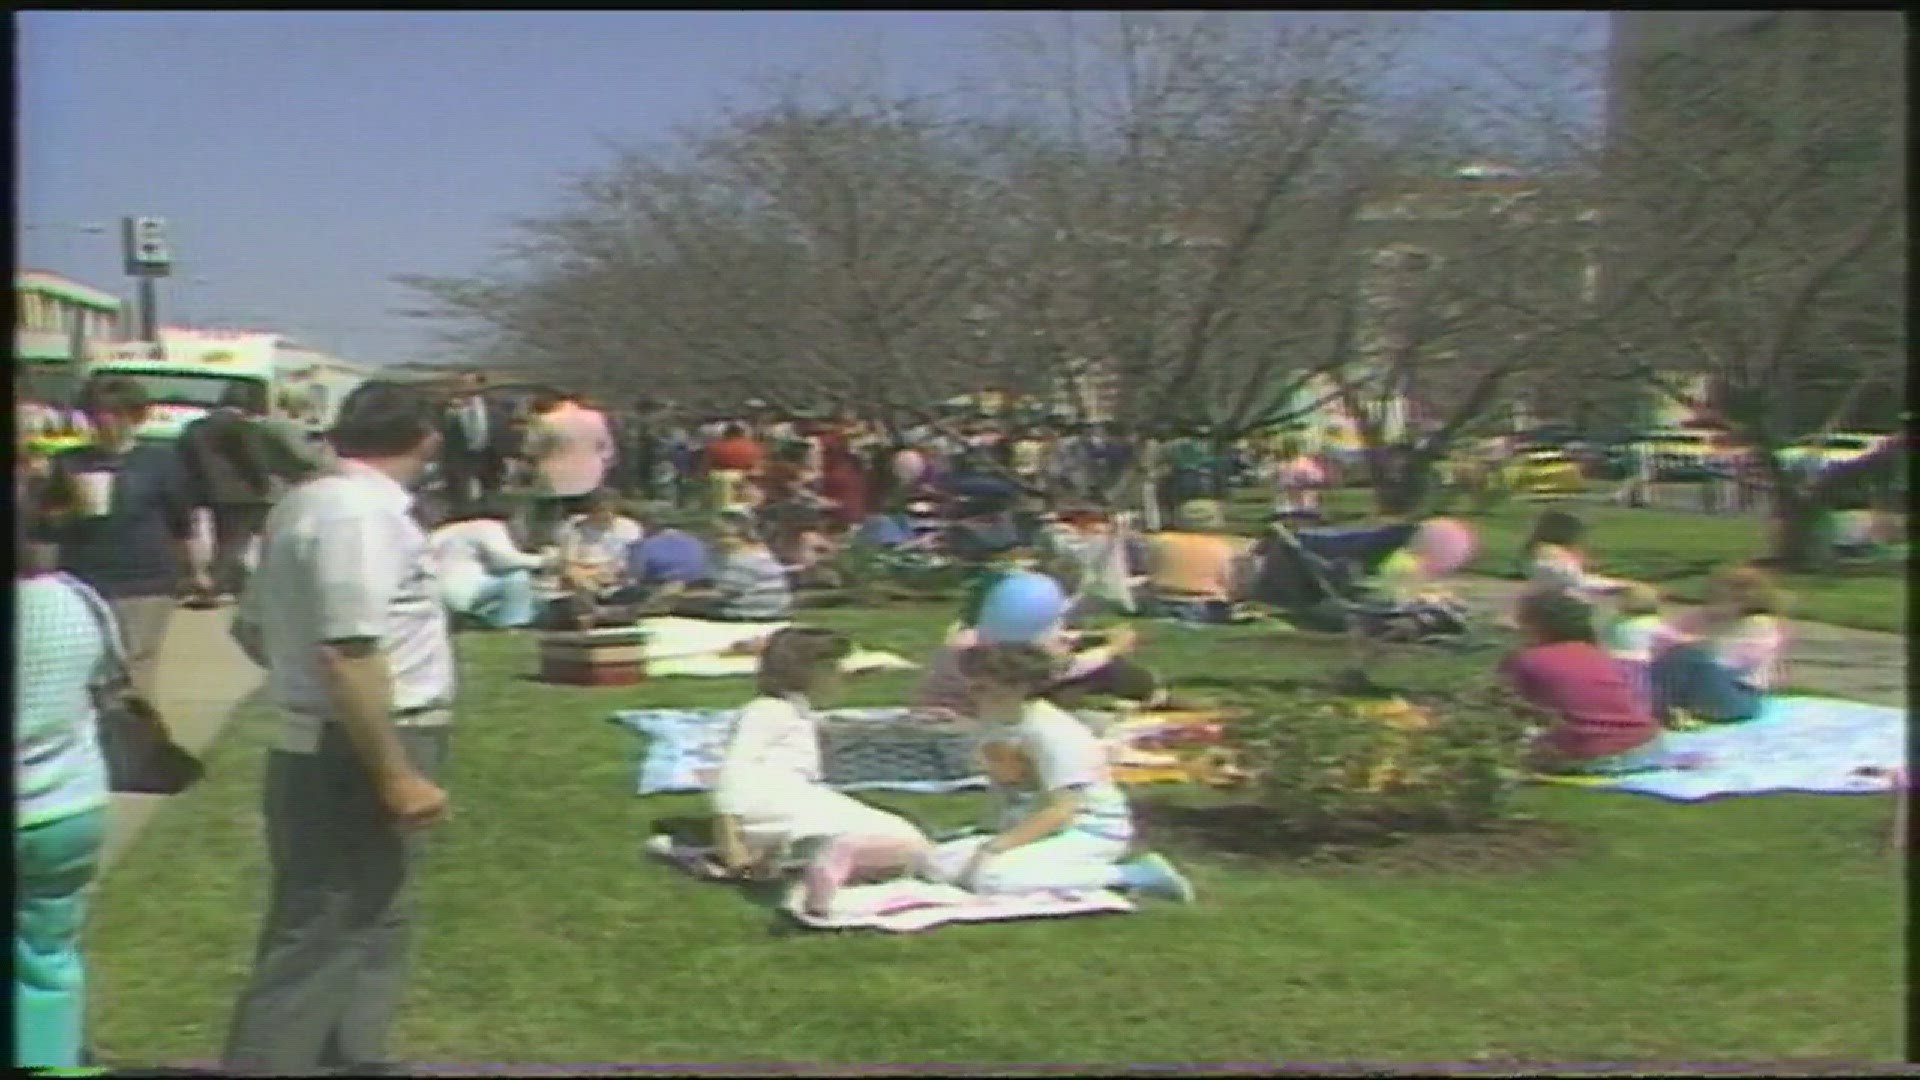 Here's some video from the 13WMAZ vault of the 1987 Cherry Blossom Festival when it was just 5 years old.